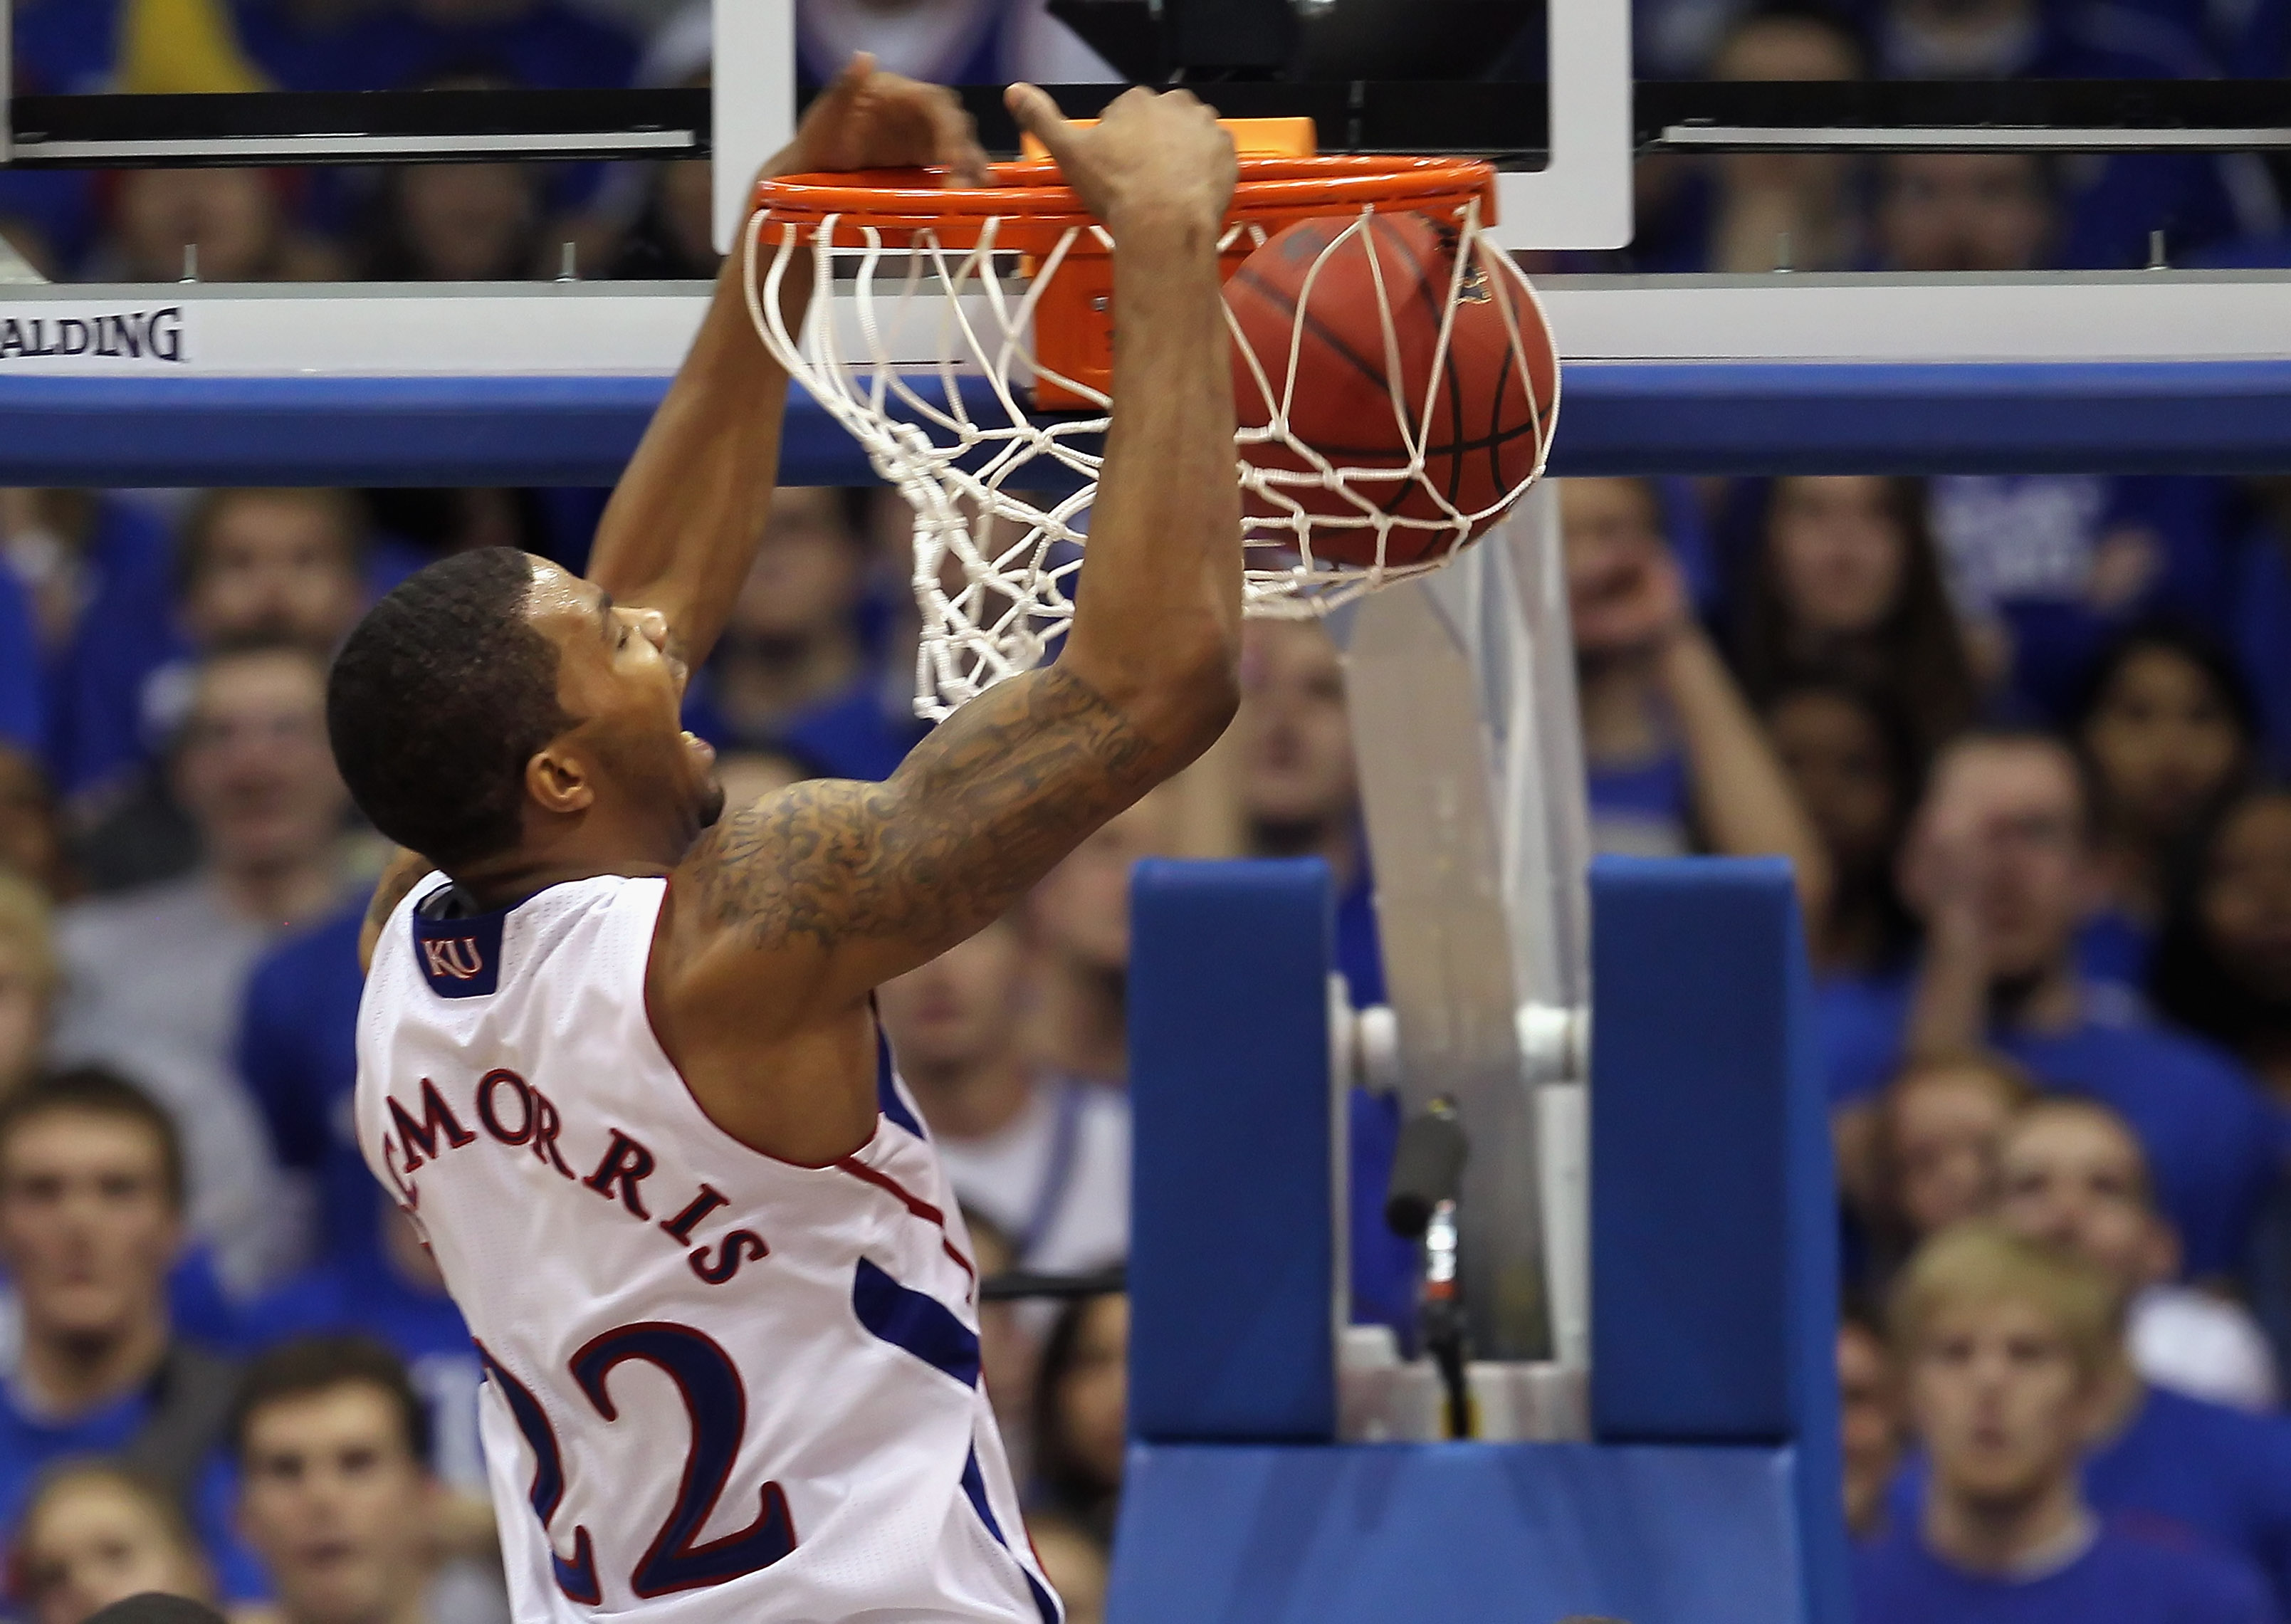 LAWRENCE, KS - JANUARY 15:  Marcus Morris #22 of the Kansas Jayhawks dunks during the game against the Nebraska Cornhuskers on January 15, 2011 at Allen Fieldhouse in Lawrence, Kansas.  (Photo by Jamie Squire/Getty Images)